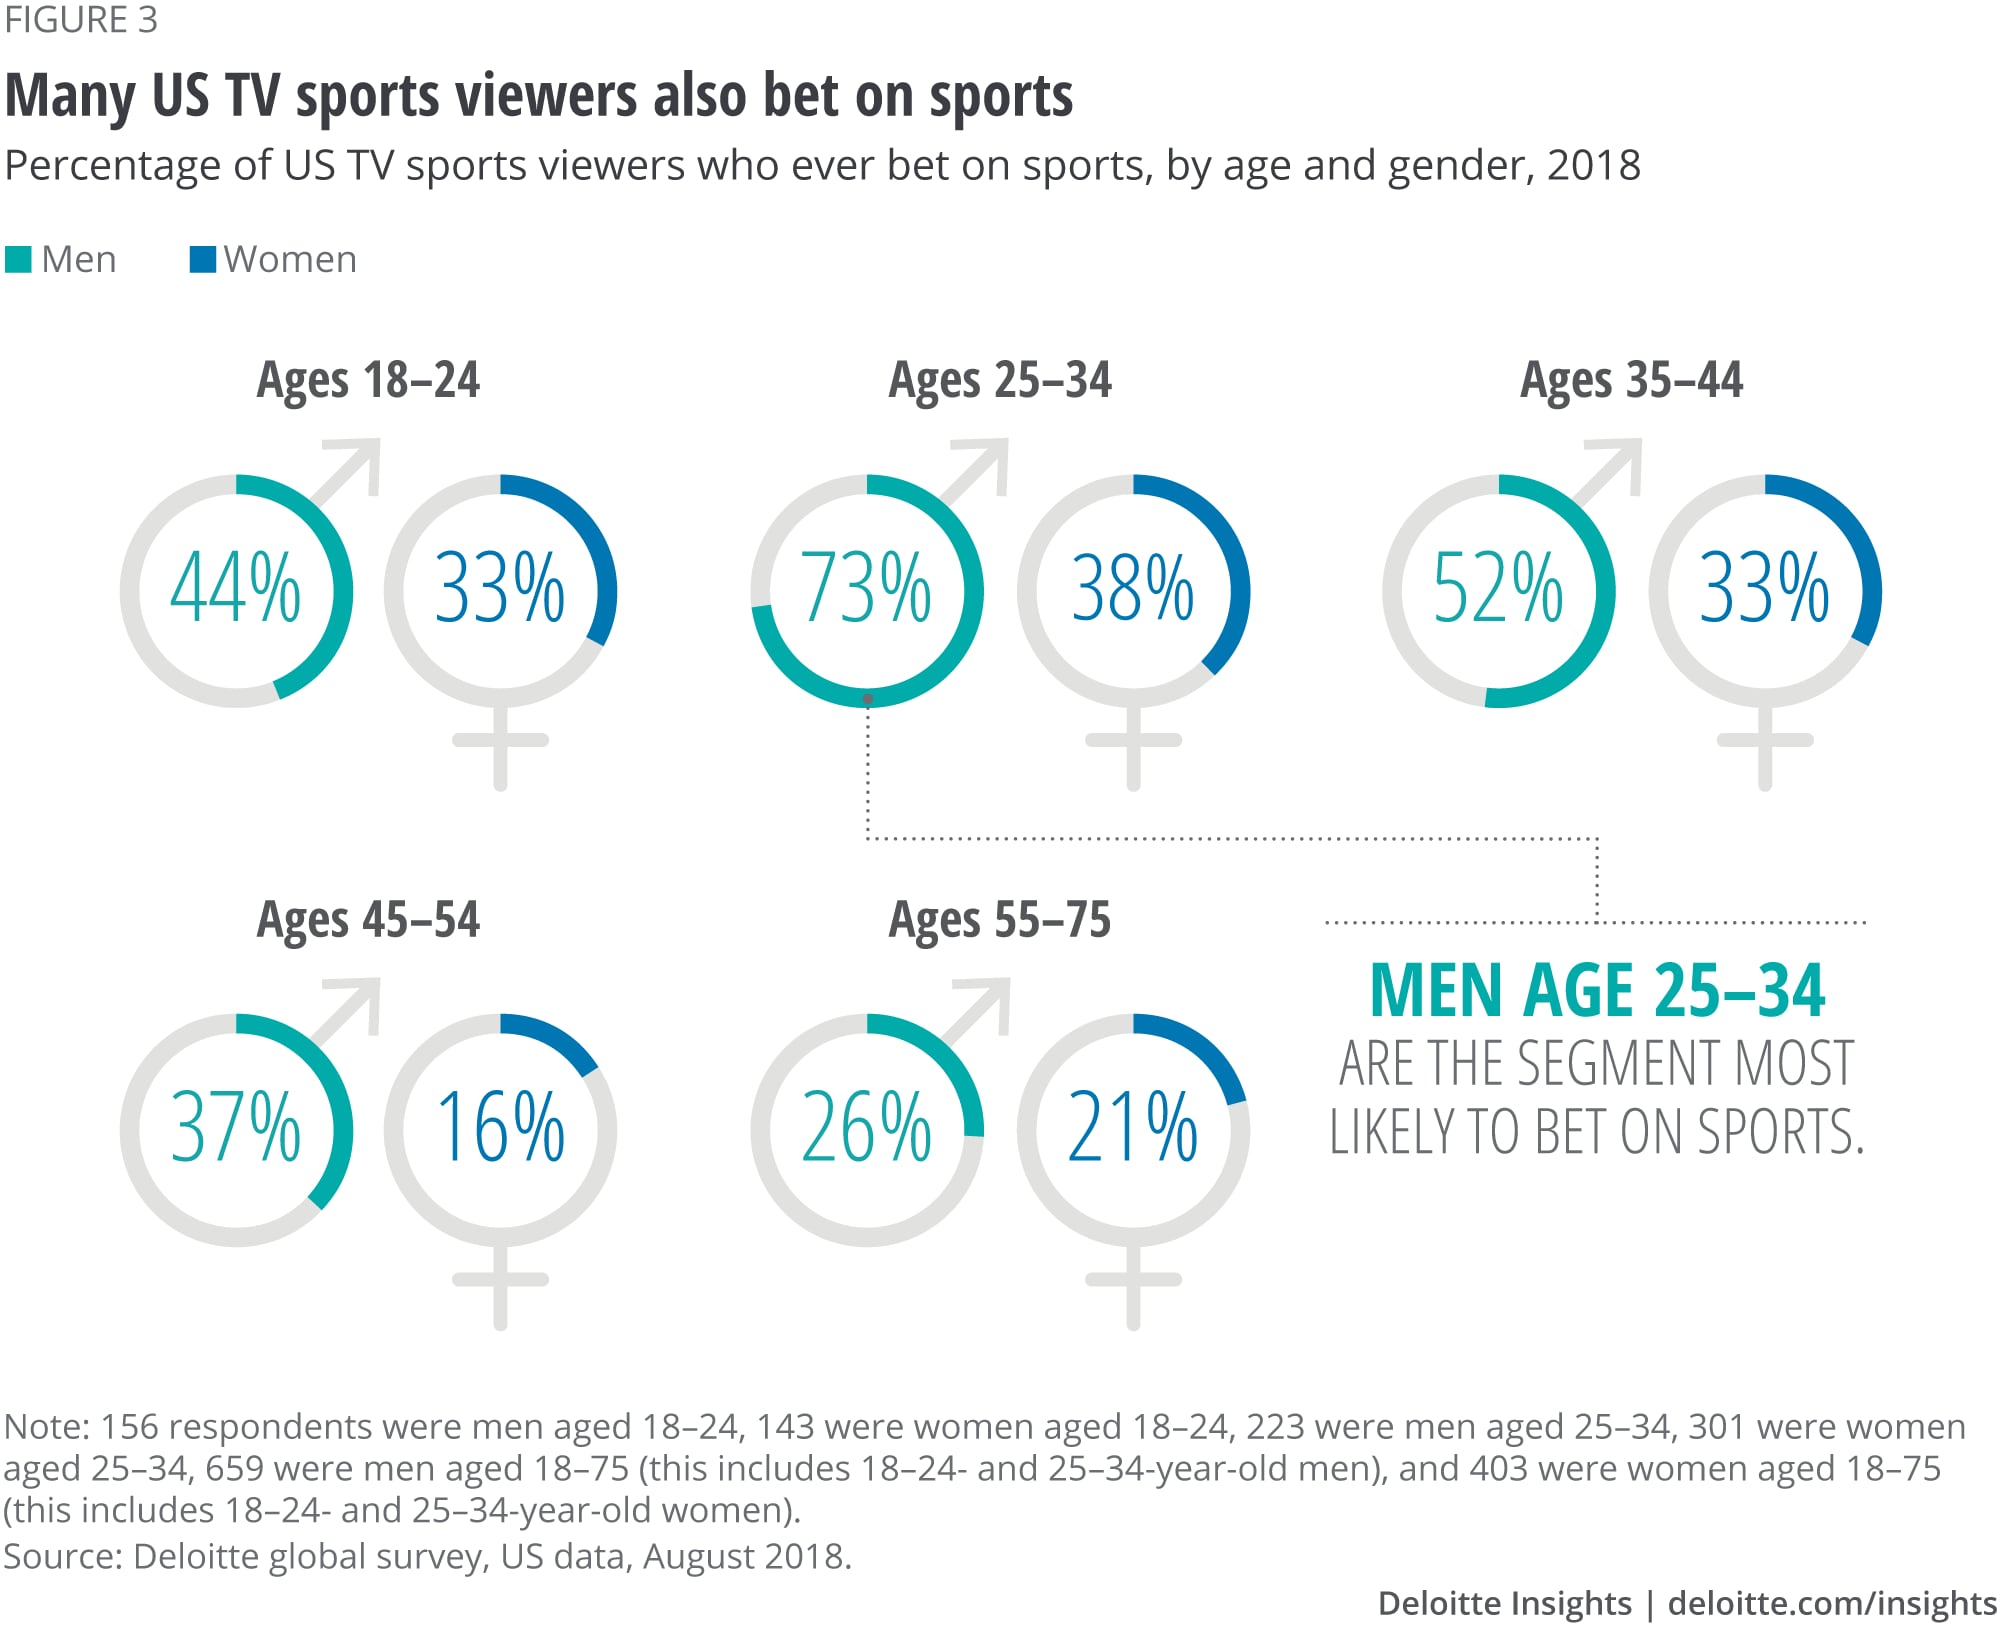 Many US TV sports viewers also bet on sports